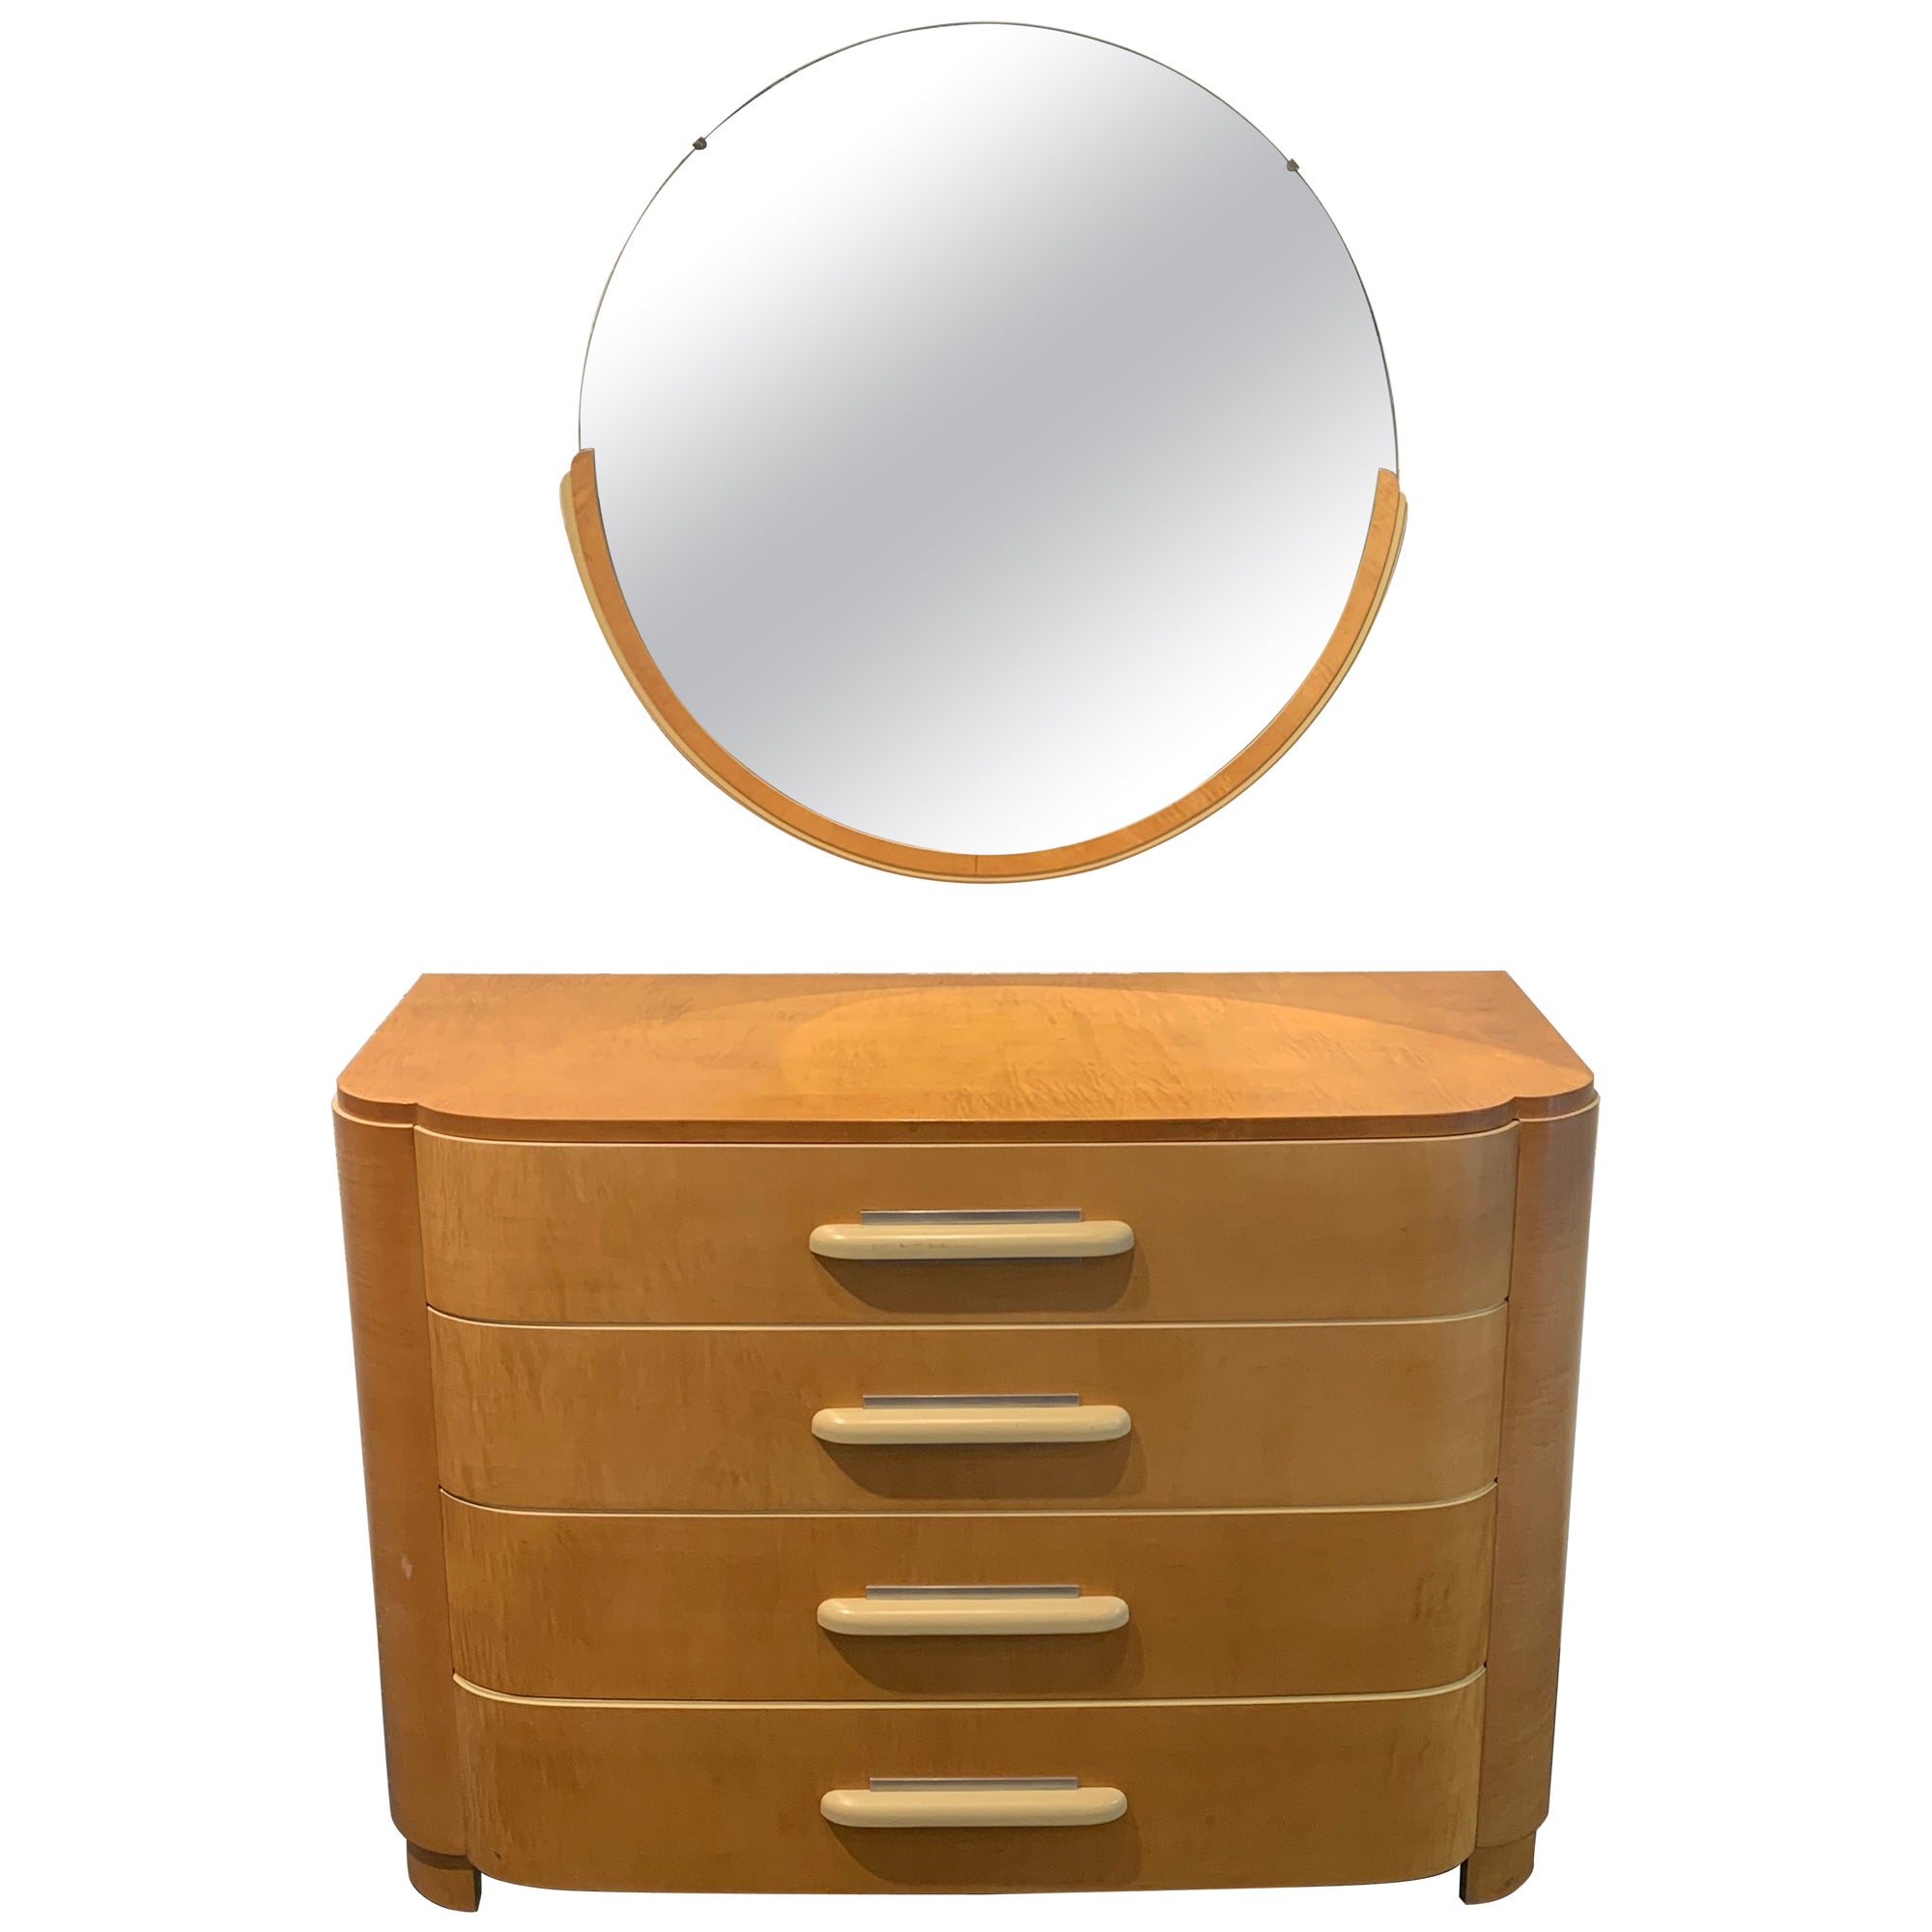 1930s Donald Deskey Art Deco Low Maple Dresser with Round Mirror for Widdicomb  For Sale